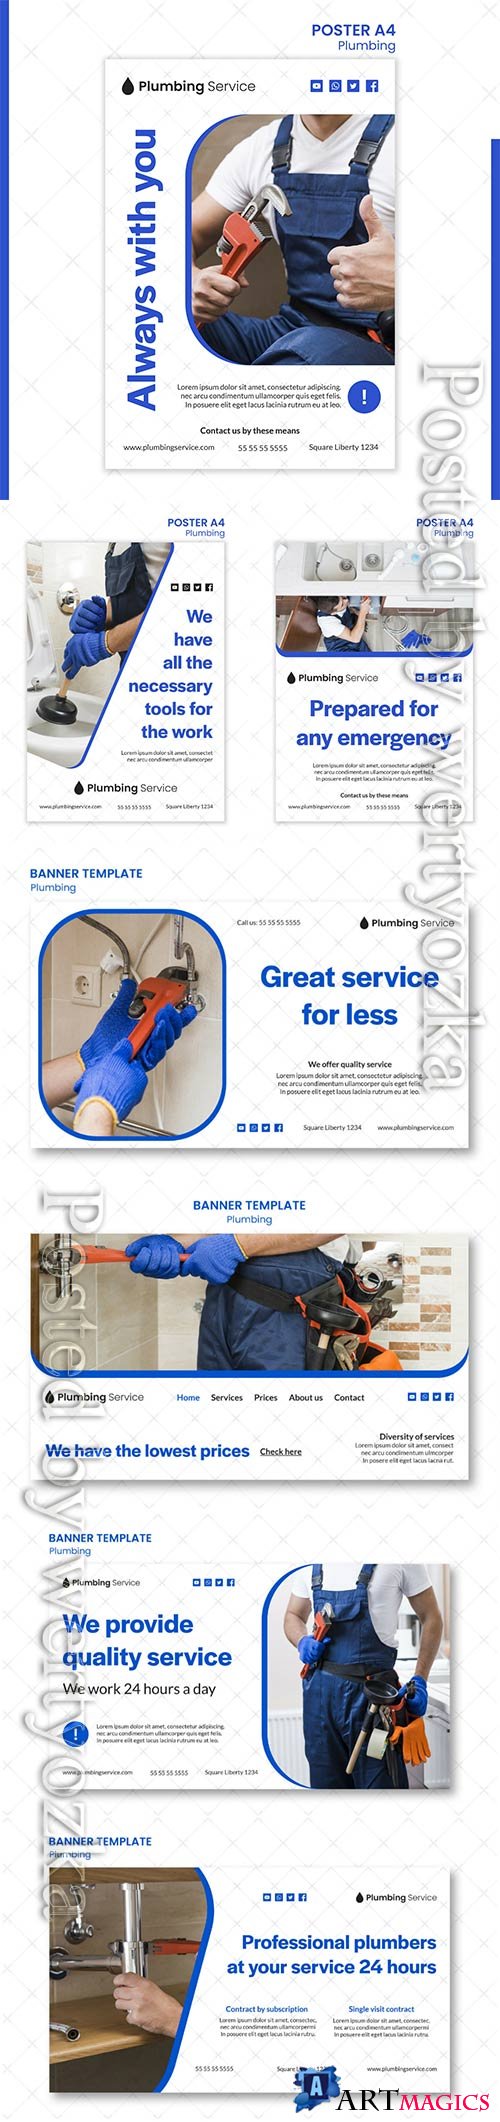 Plumbing lowest prices banner template